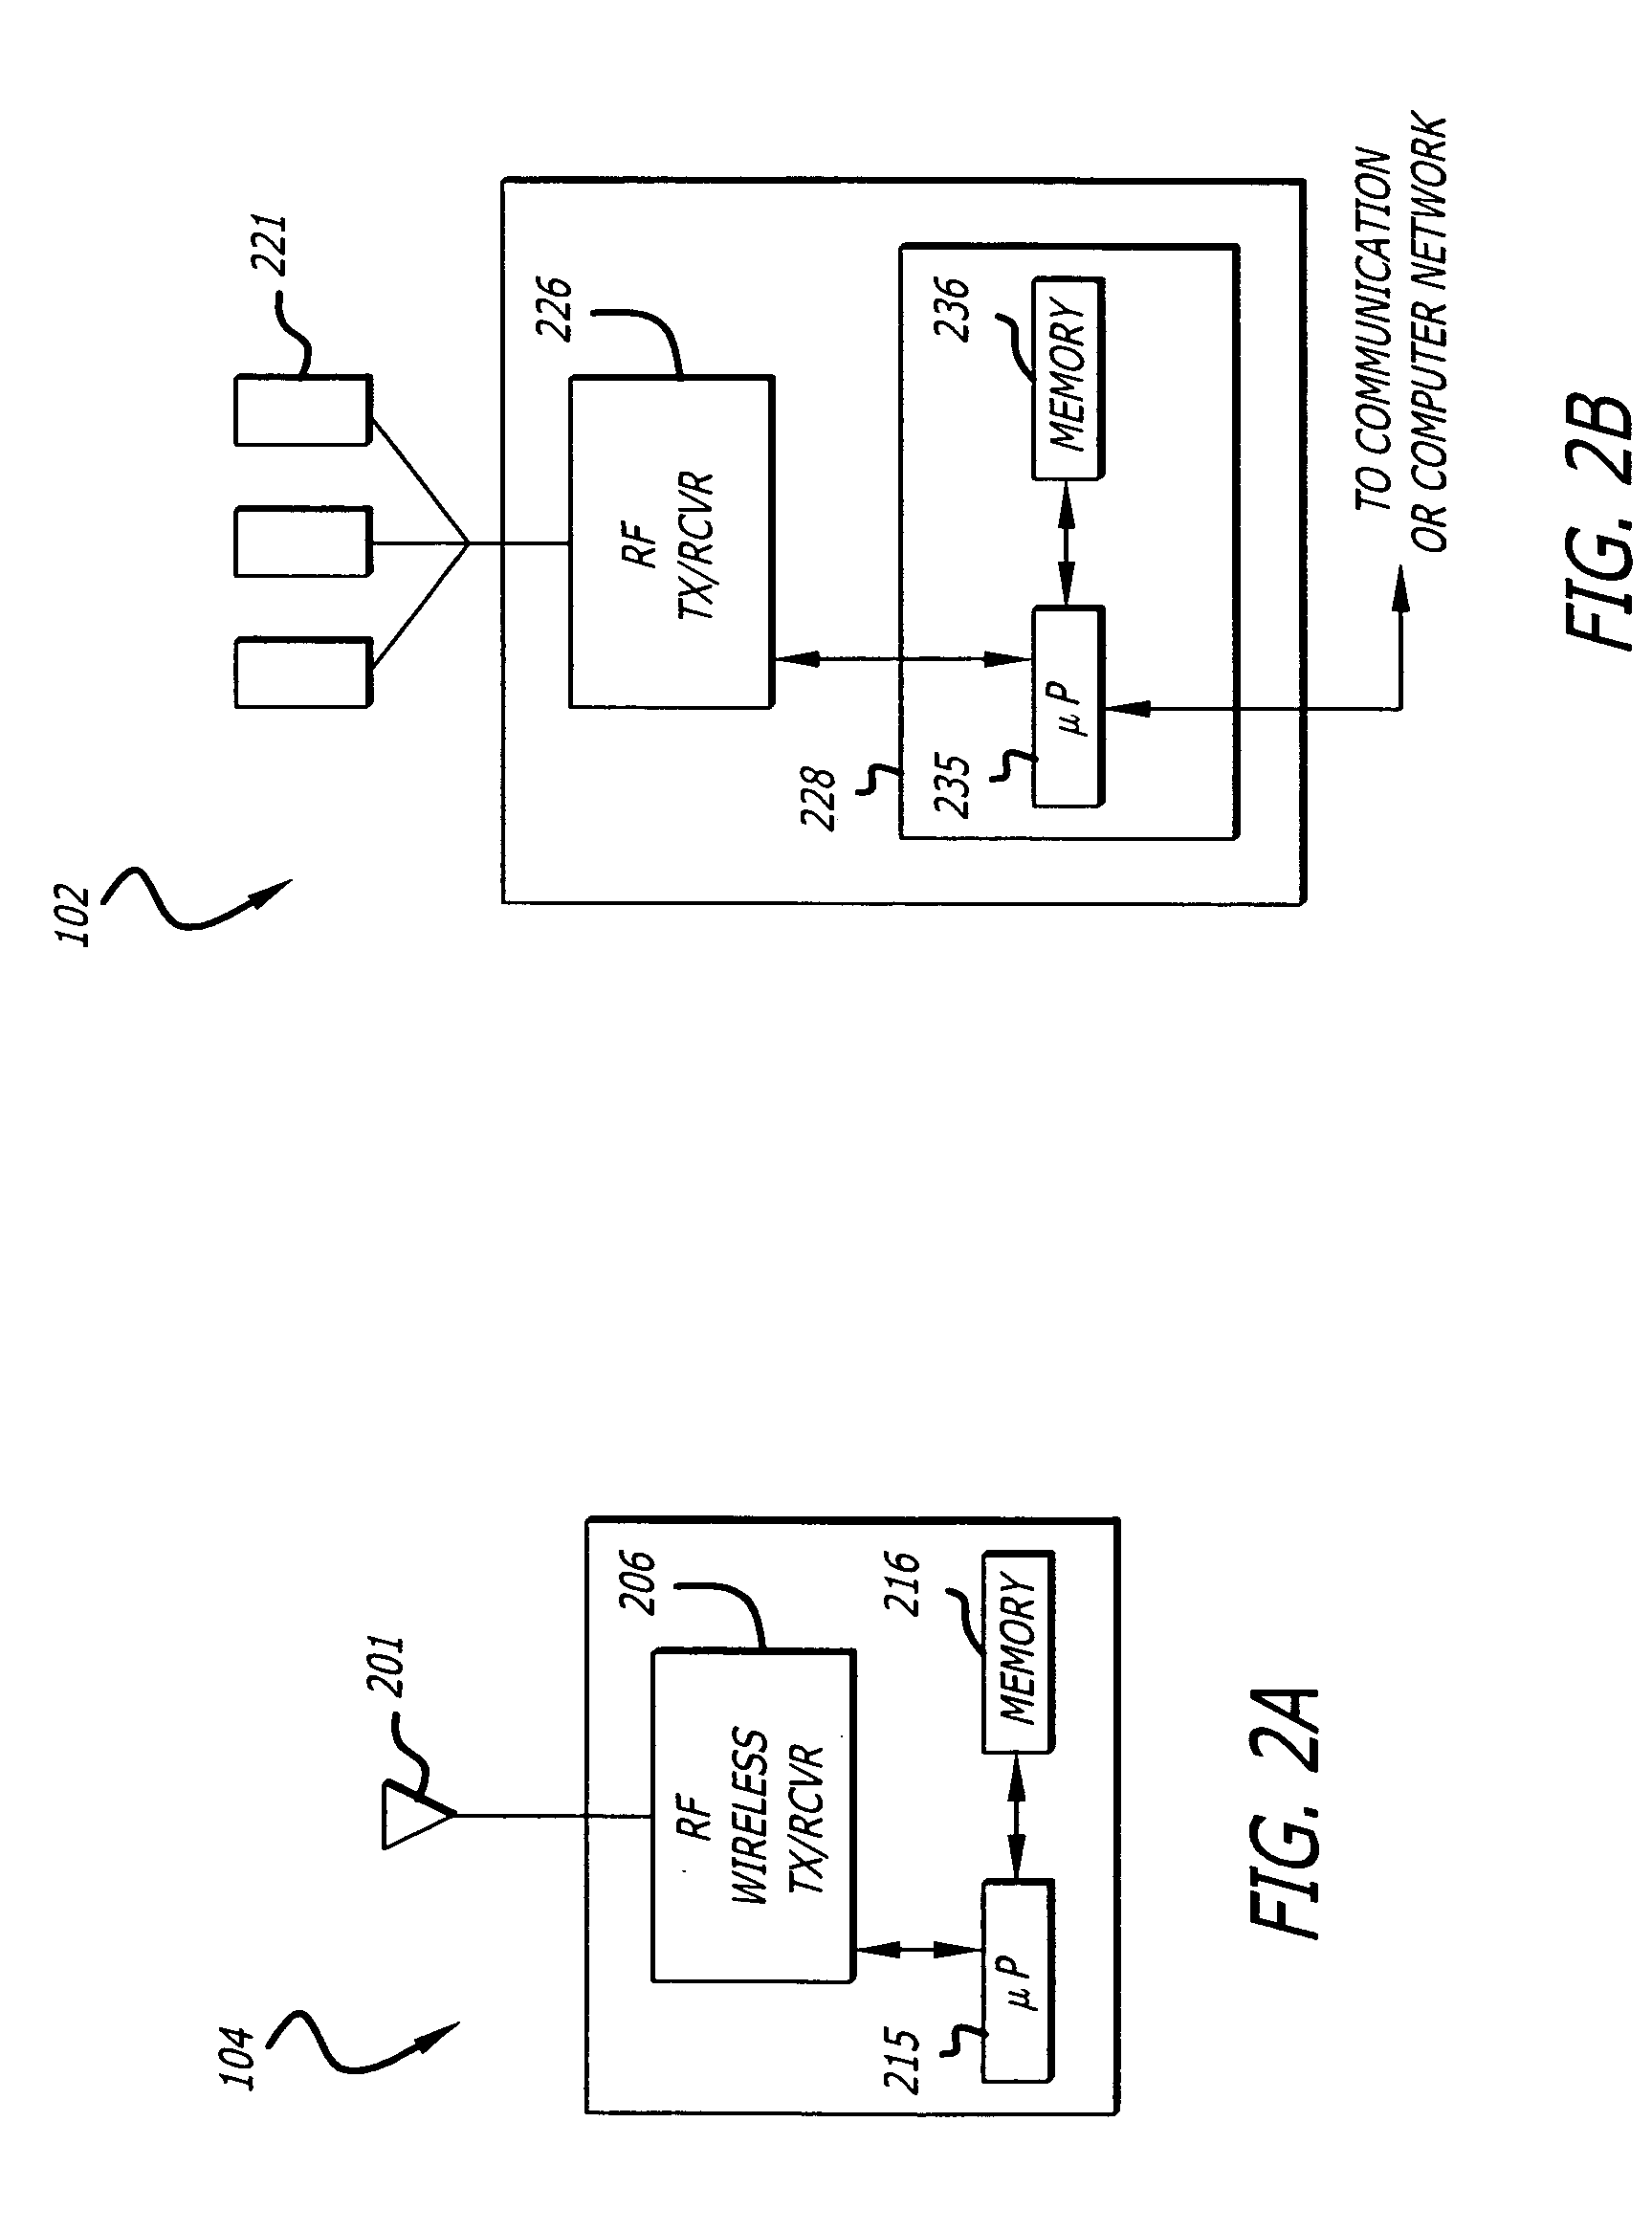 Method, apparatus, and systems for digital radio communication systems